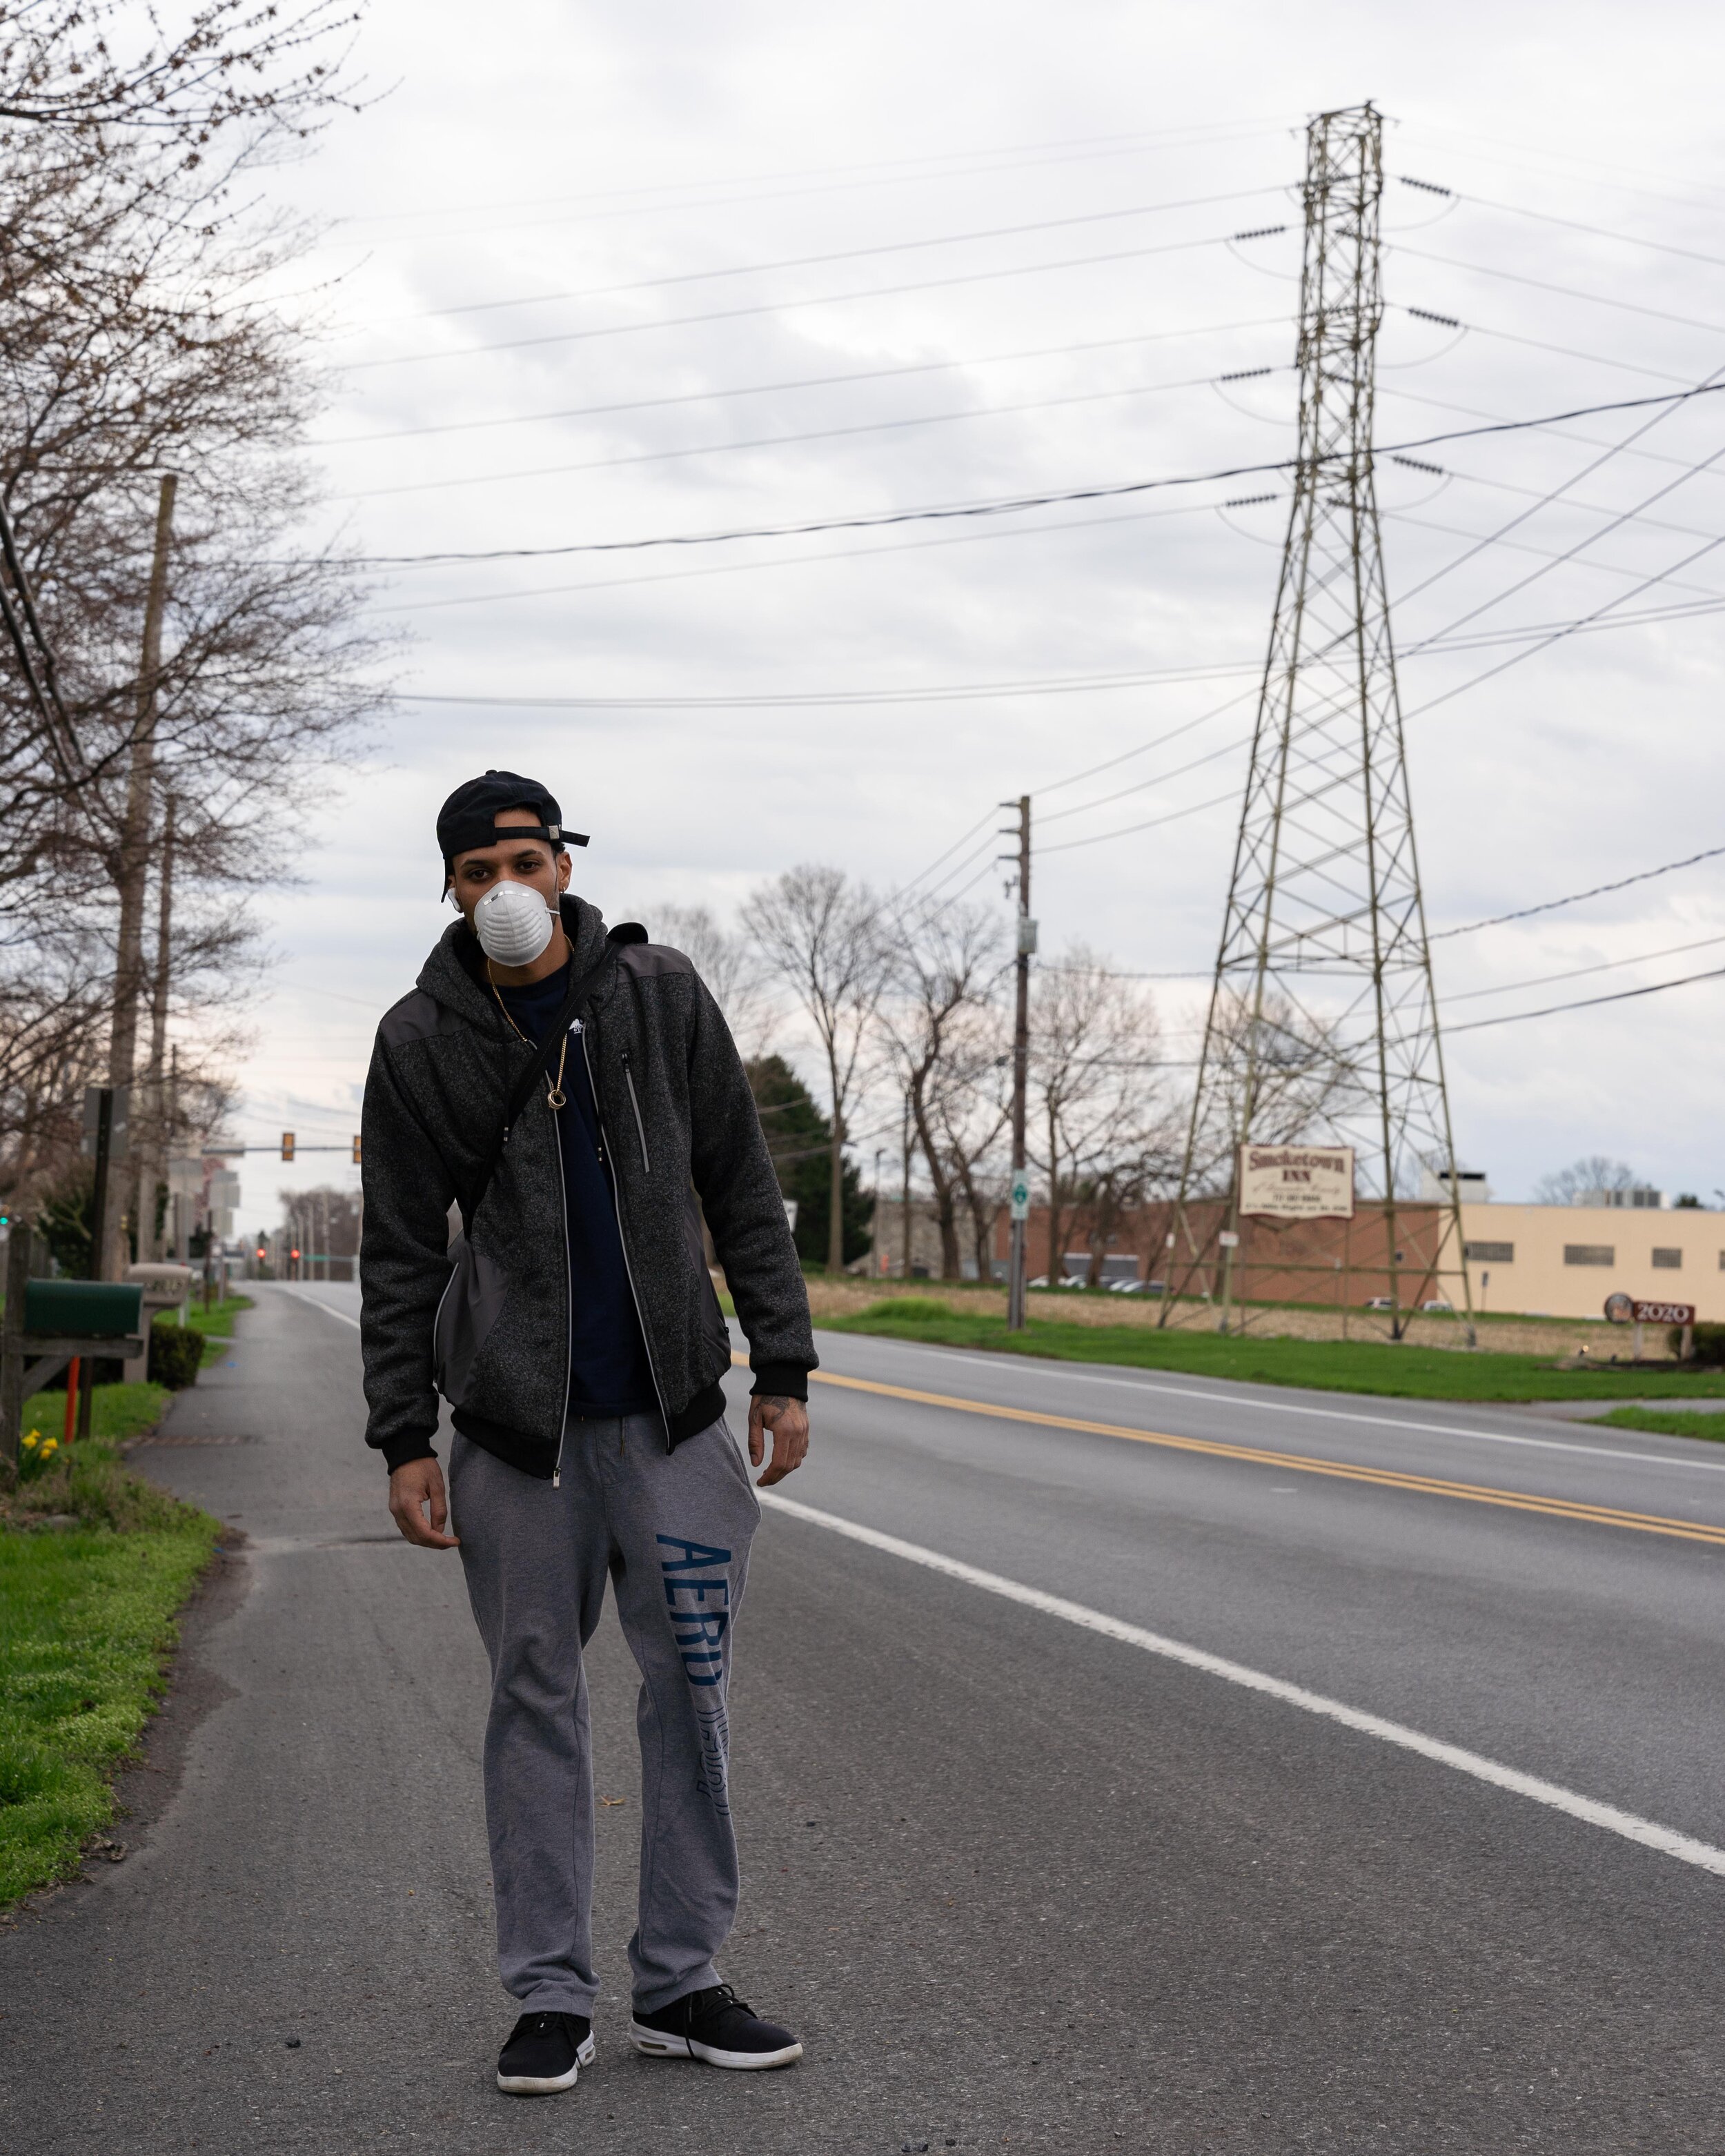  “I’m just trying to get home after work, I’m still out here working. I seen the bus go up, it usually comes through by 4, I don’t know what’s up with it today.” - Ariel | 03/30/20 (Lancaster, PA) 